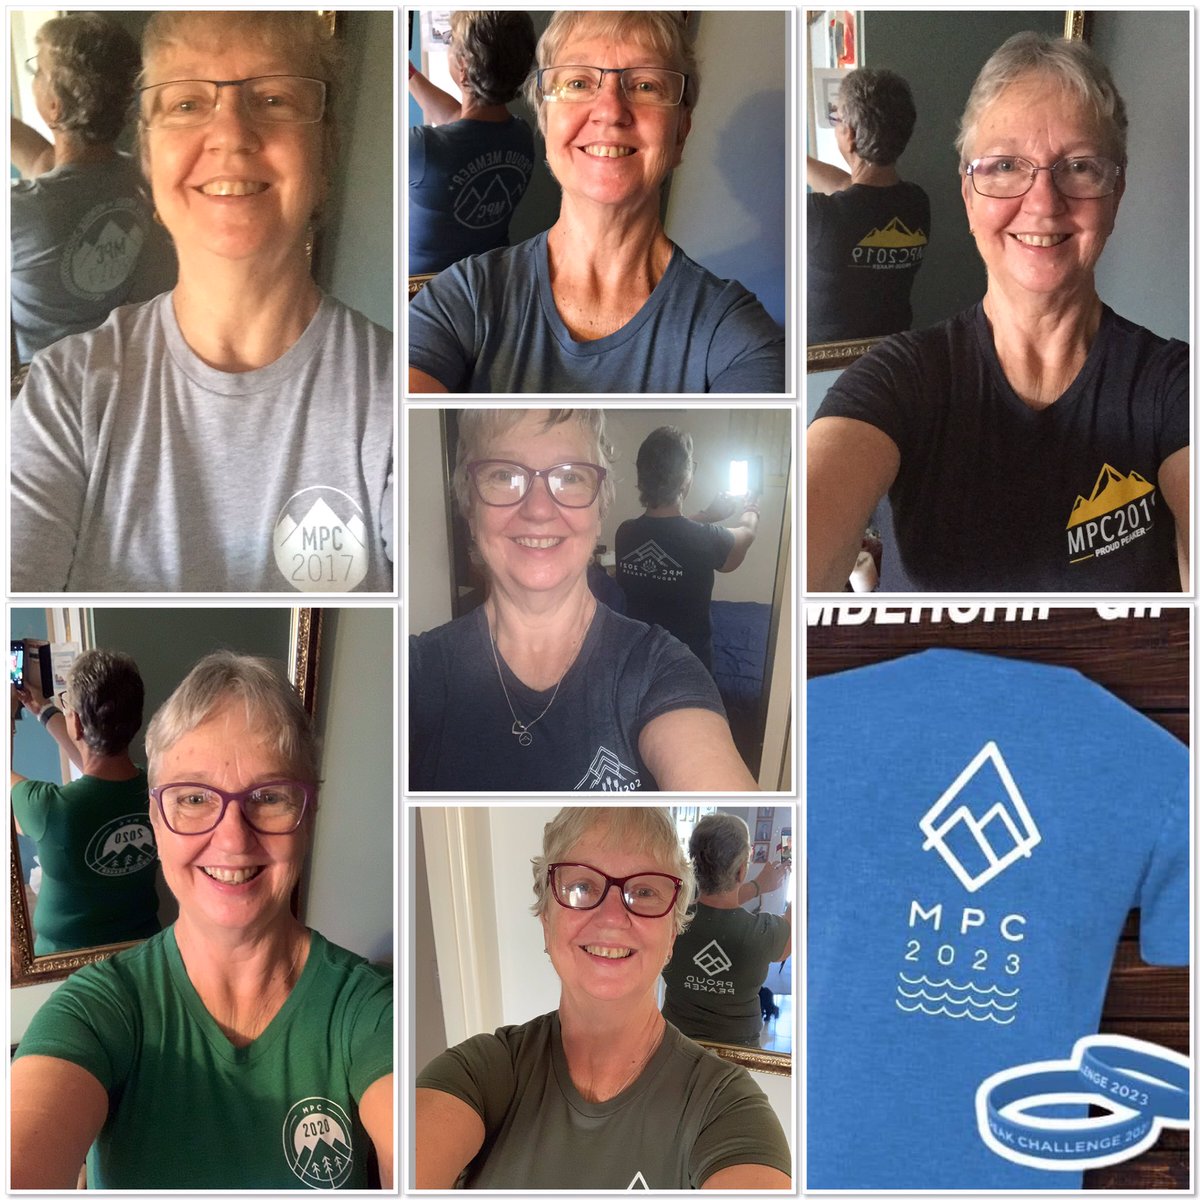 Excited to be a 7th Year Peaker 💪💪 MPC has literally saved my life and I am looking forward to seeing what the year brings, hopefully lots of Peaker Meet ups and lots of fun and hard work. #MPC2023 #aussiepeakers @SamHeughan @MyPeakChallenge @CoachValbo @RealAlexNorouzi